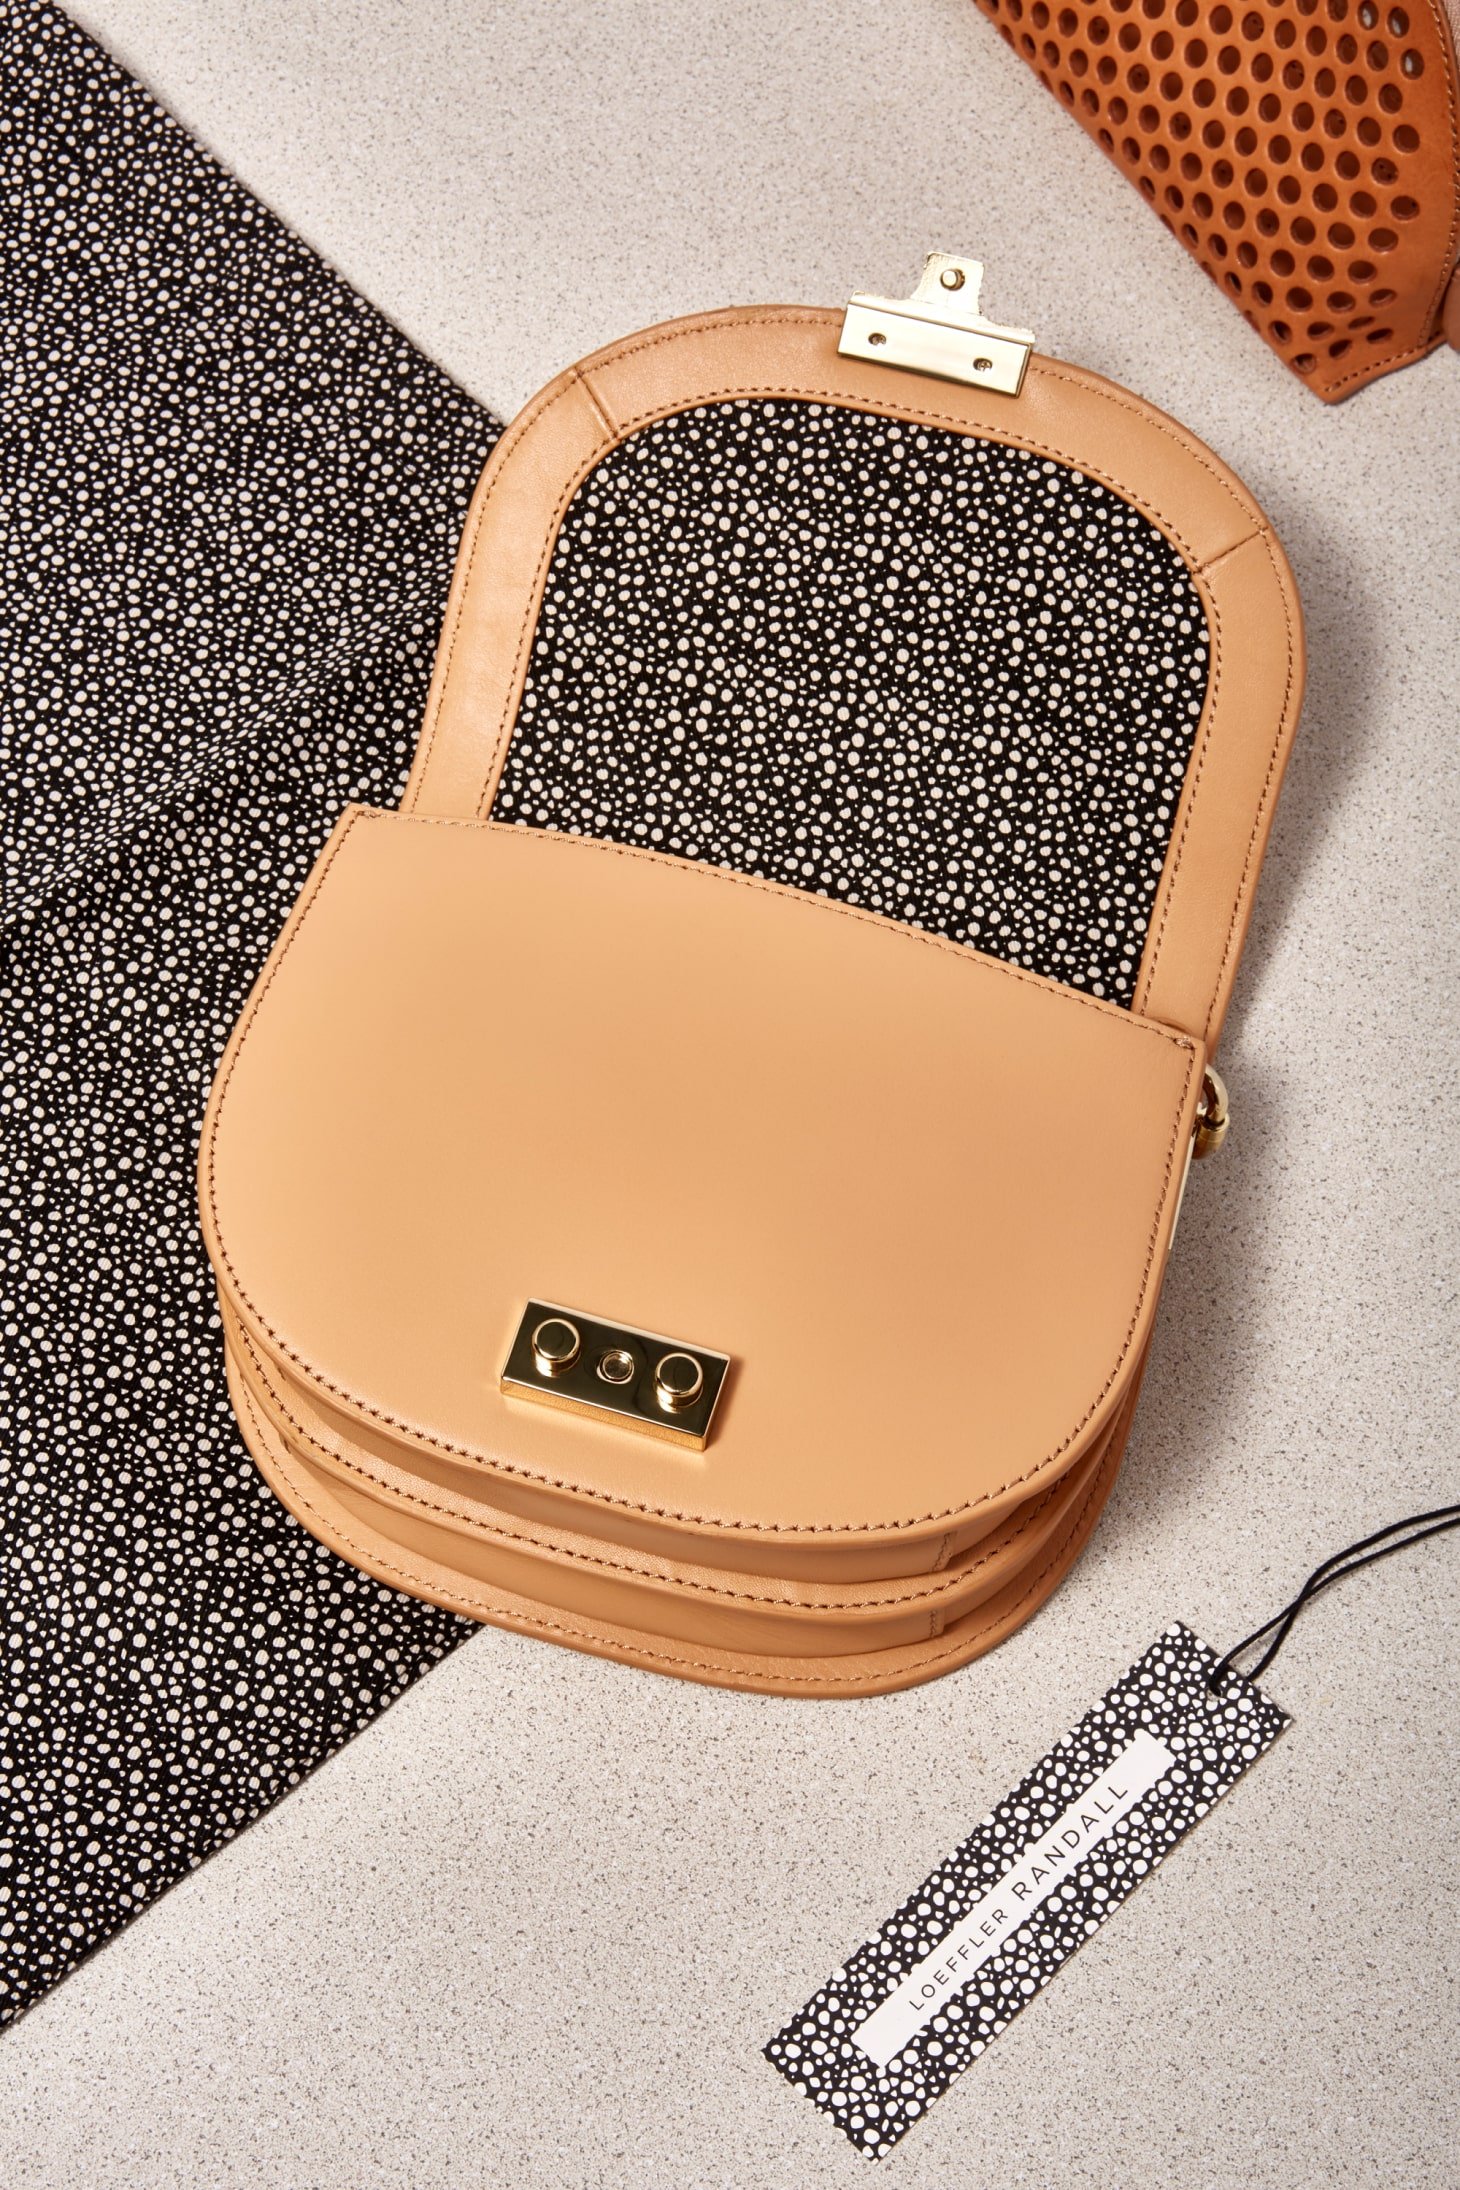 Tan Loeffler Randall purse, featuring hang tag. Branding, Packaging and art direction by RoAndCo